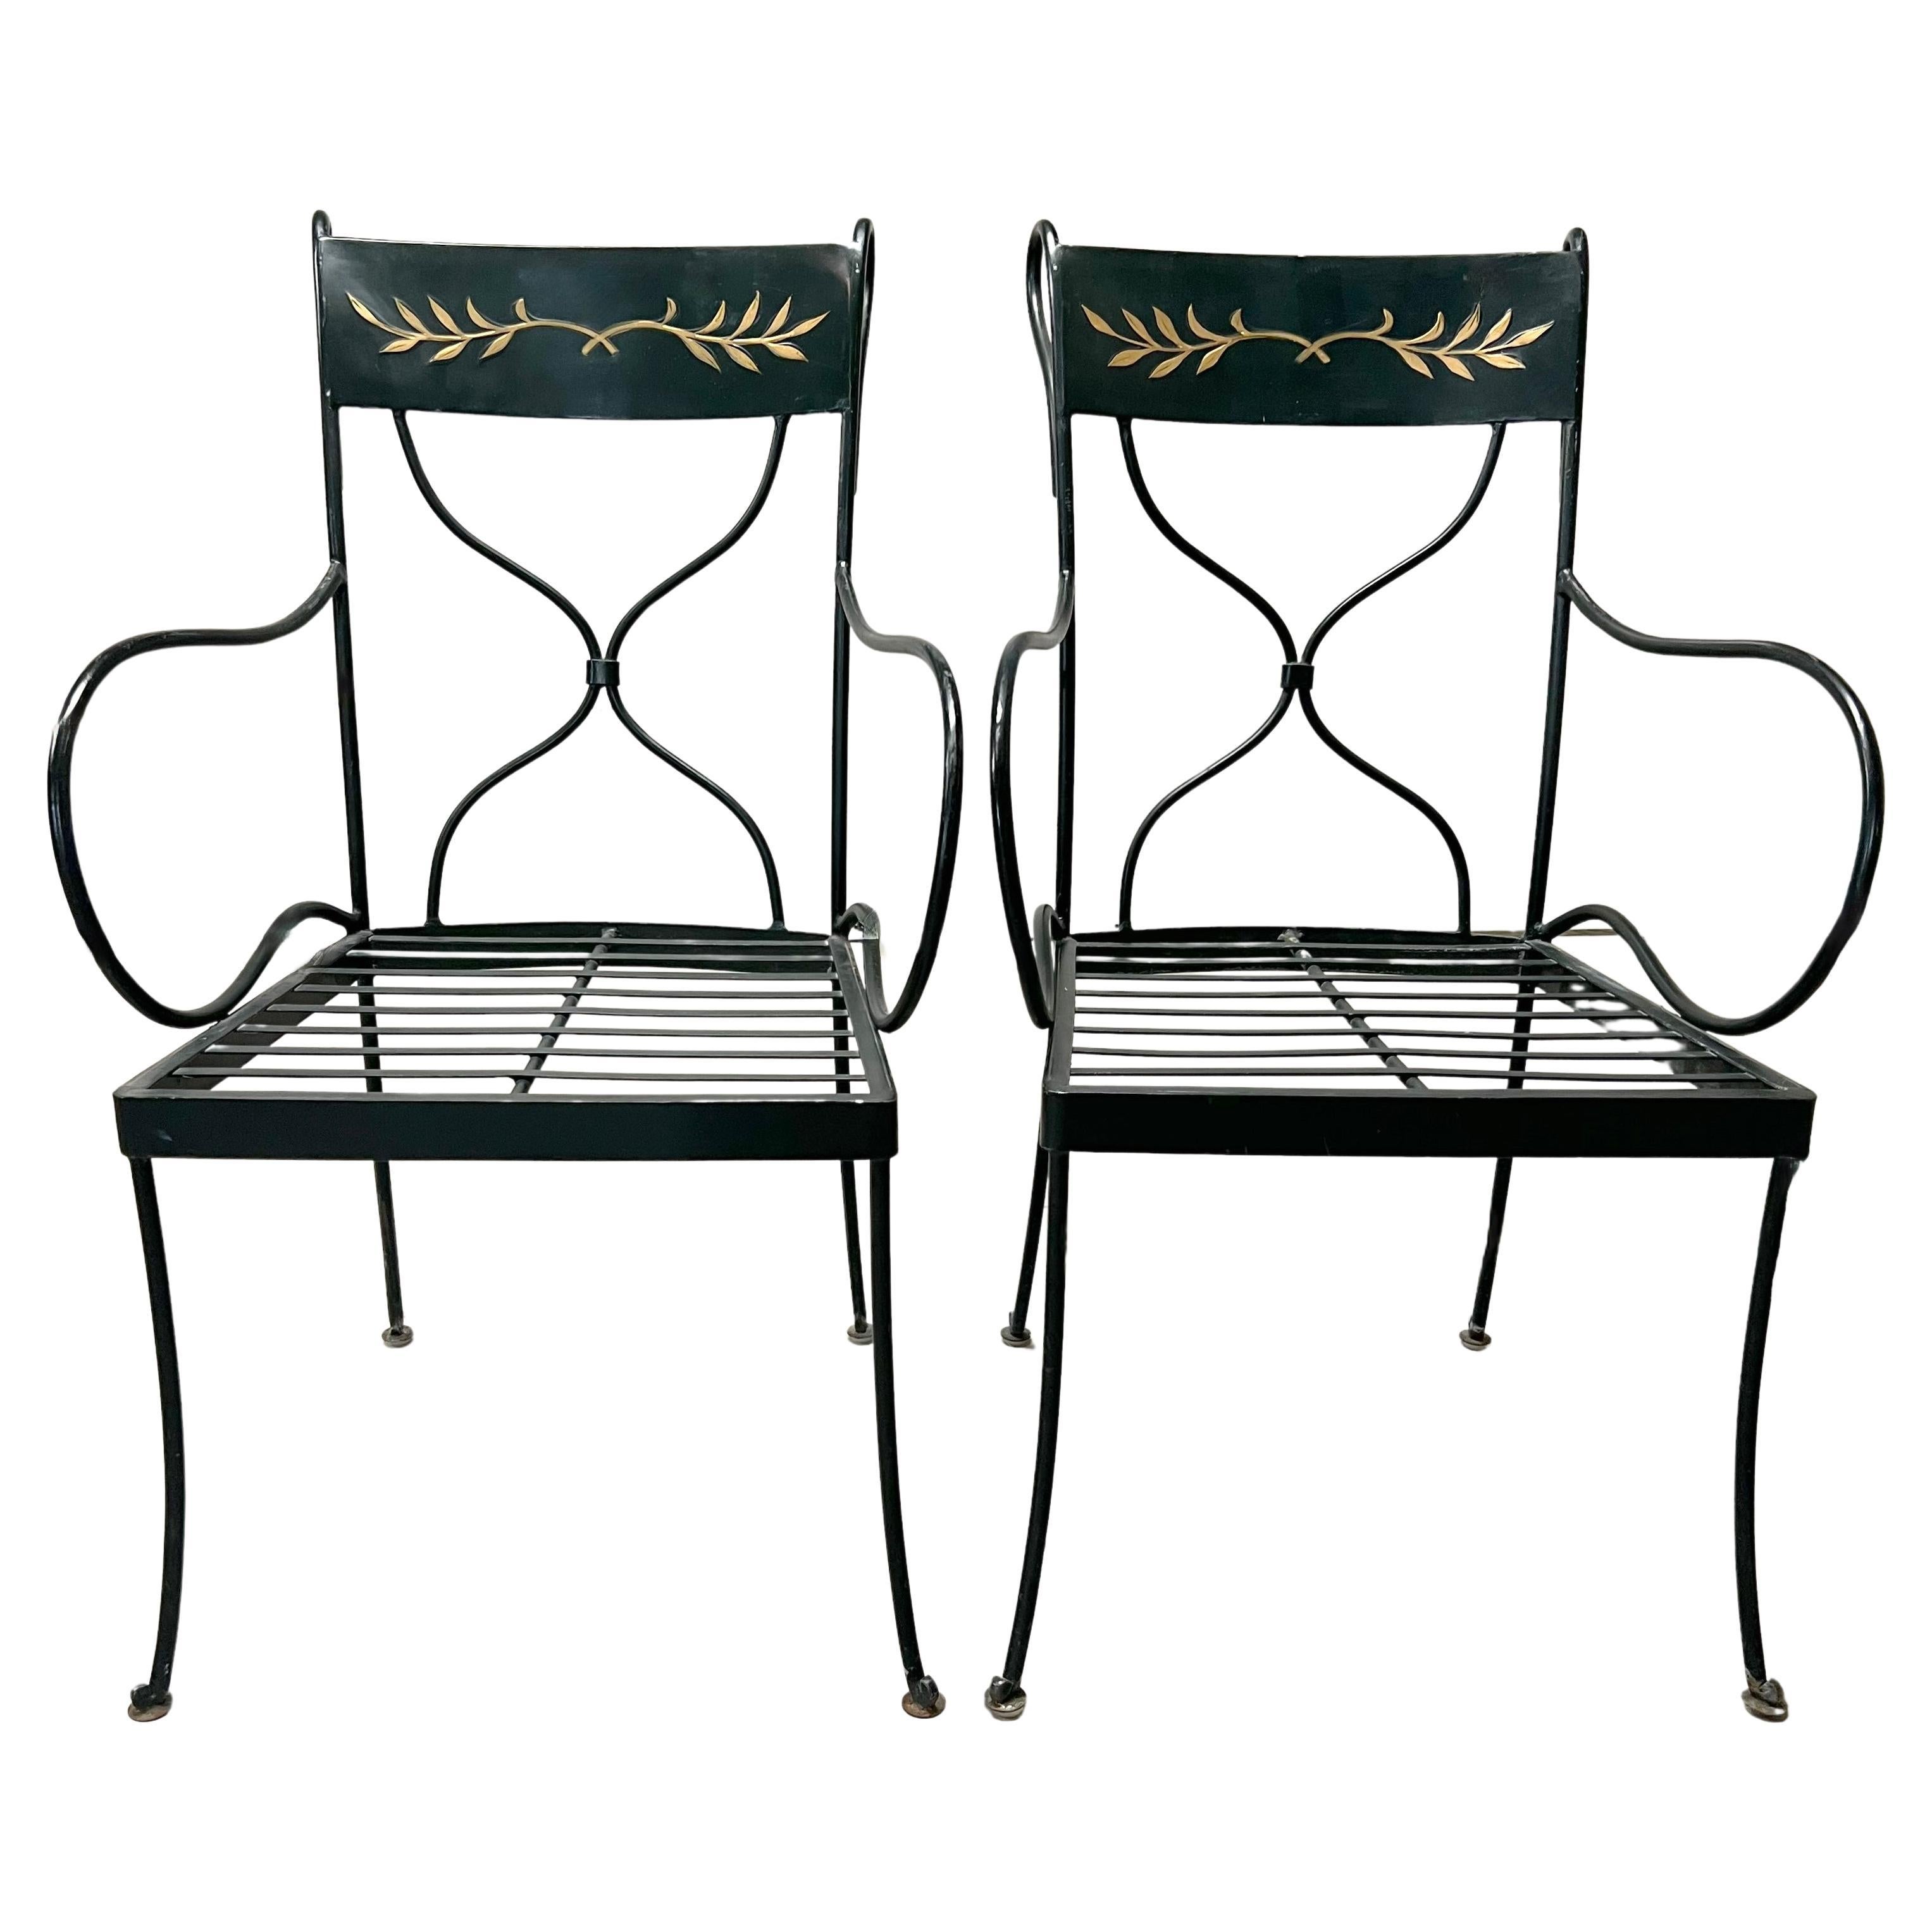 Vintage Wrought Iron Black Metal Indoor Outdoor Patio Chairs Furniture Gold Leav For Sale